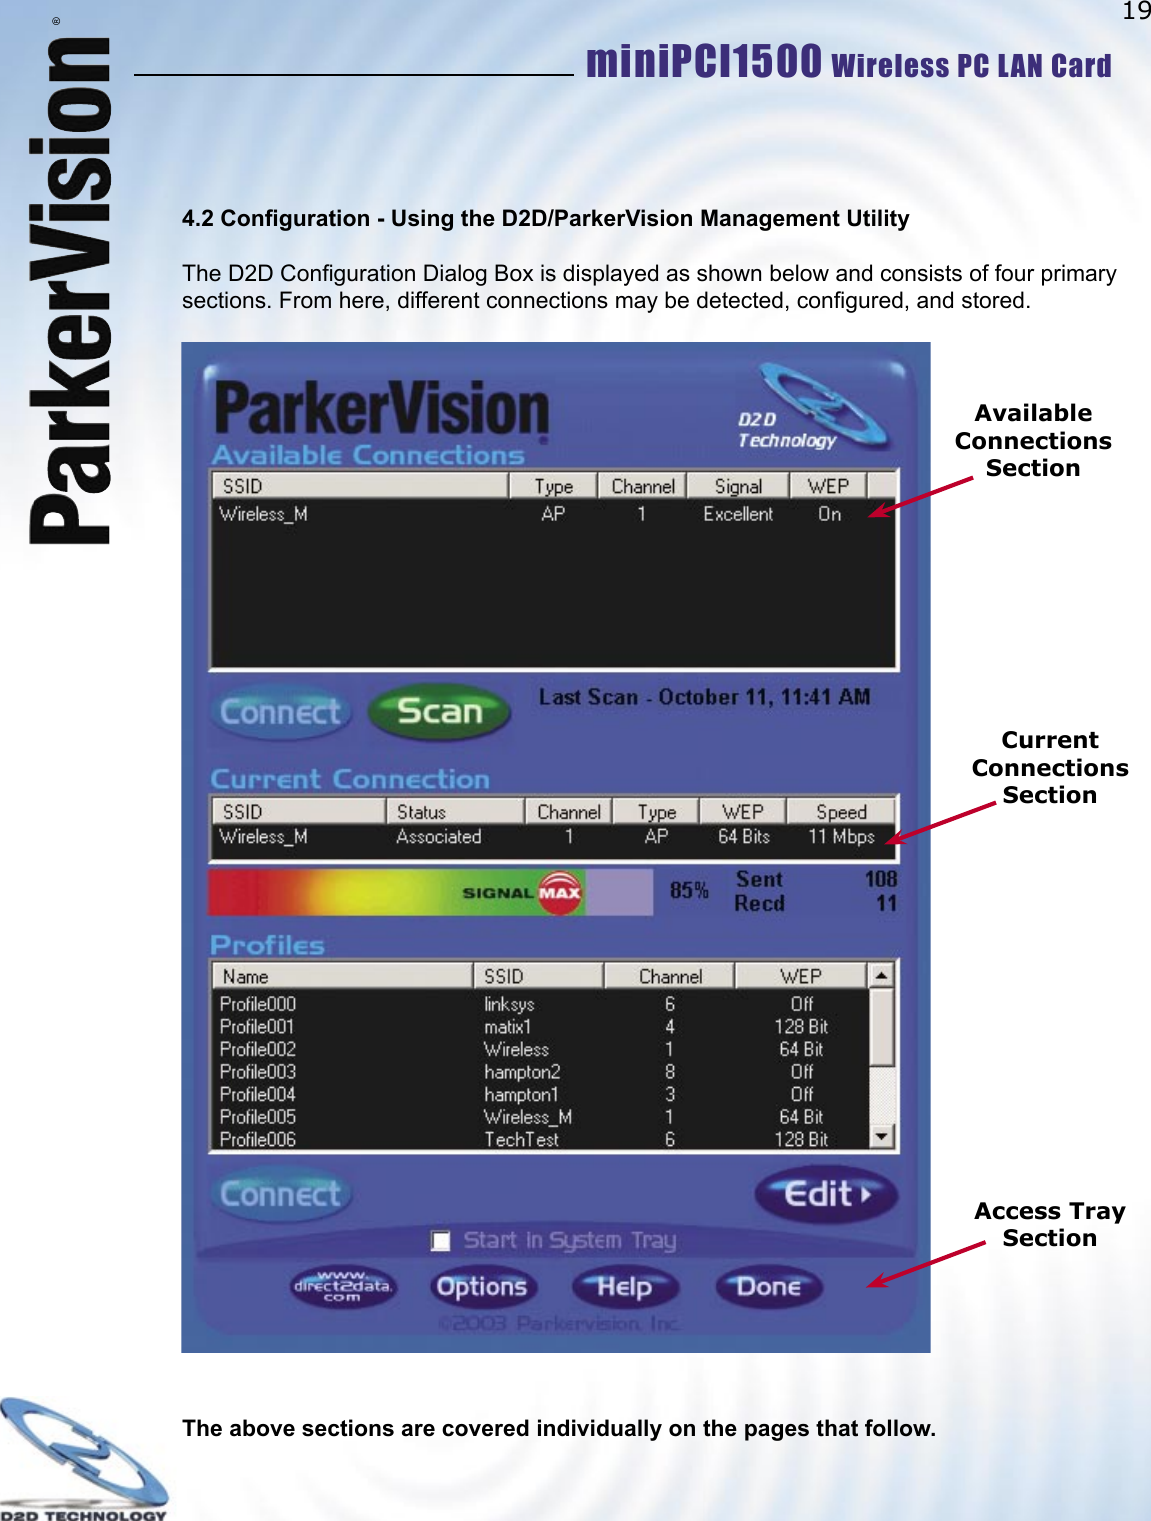 19miniPCI1500 Wireless PC LAN Card ®4.2 Conﬁ guration - Using the D2D/ParkerVision Management UtilityThe D2D Conﬁ guration Dialog Box is displayed as shown below and consists of four primary sections. From here, different connections may be detected, conﬁ gured, and stored.      The above sections are covered individually on the pages that follow.Available Connections SectionCurrent Connections SectionAccess Tray Section